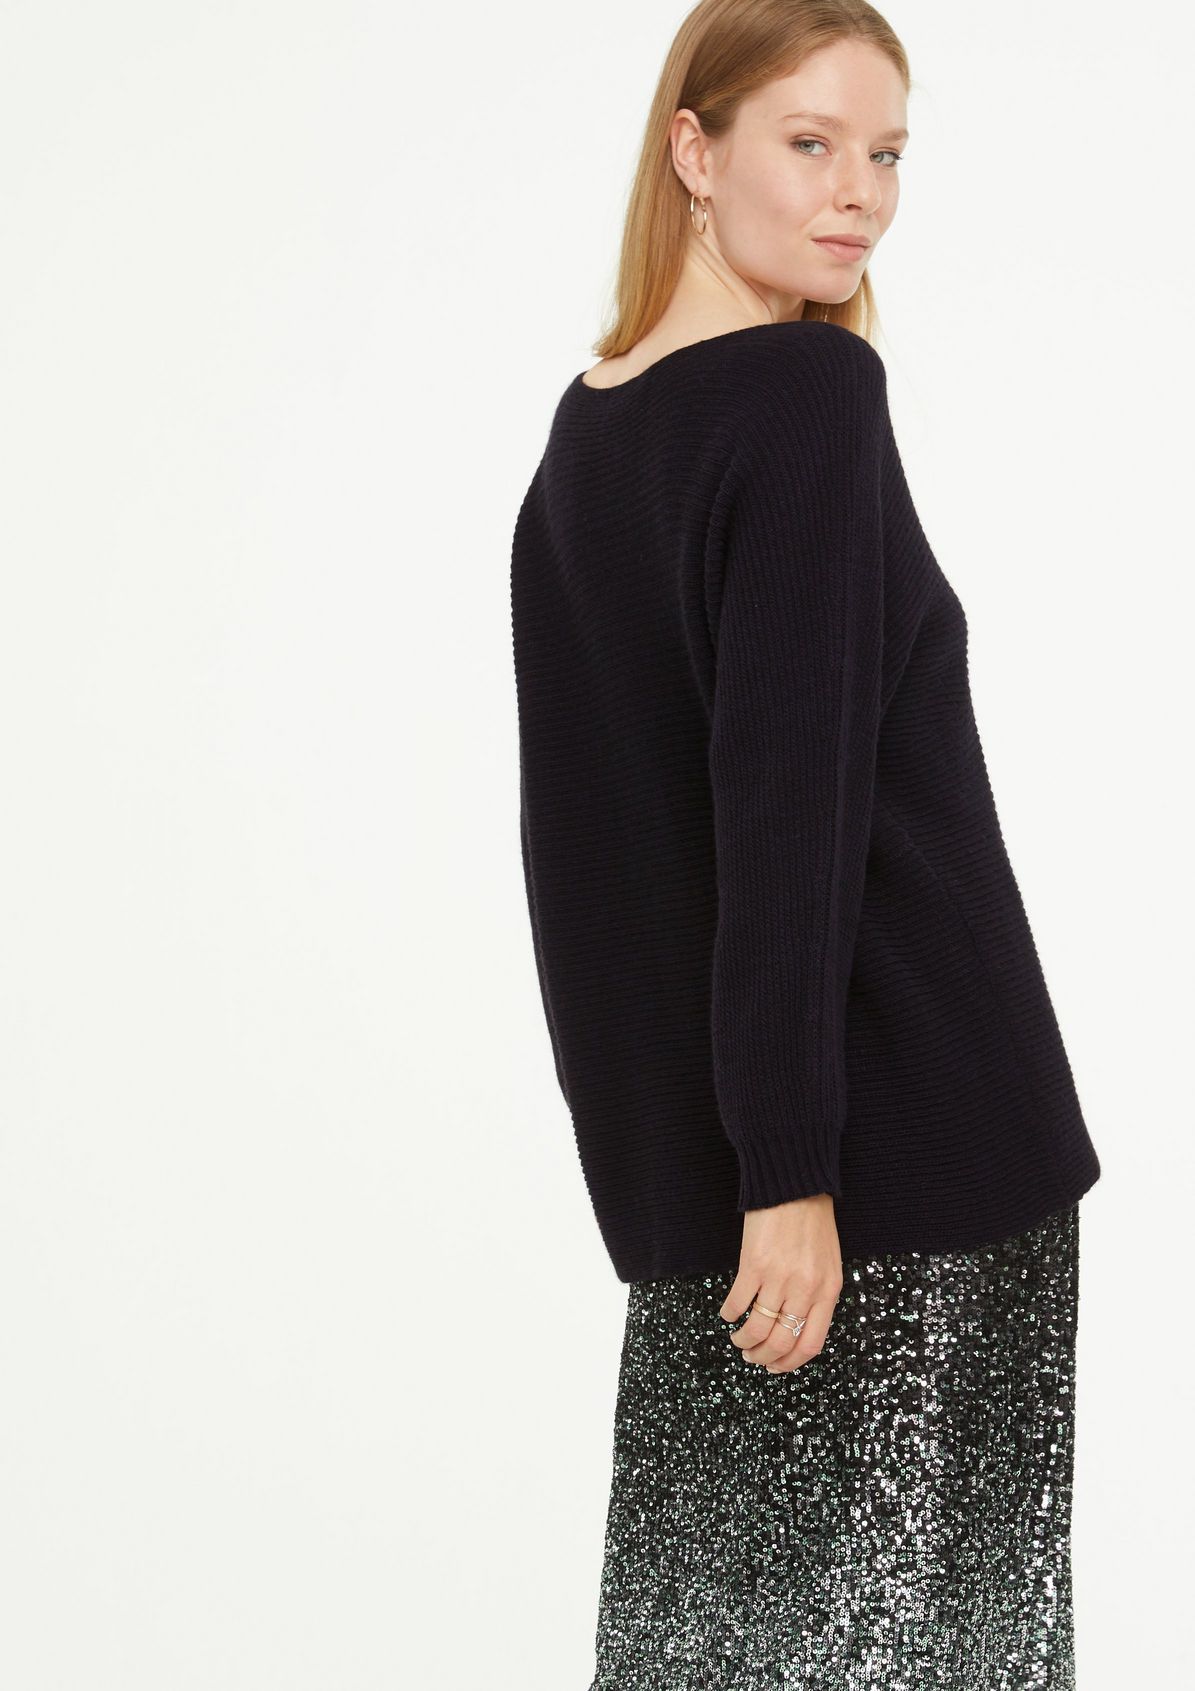 Oversized jumper from comma